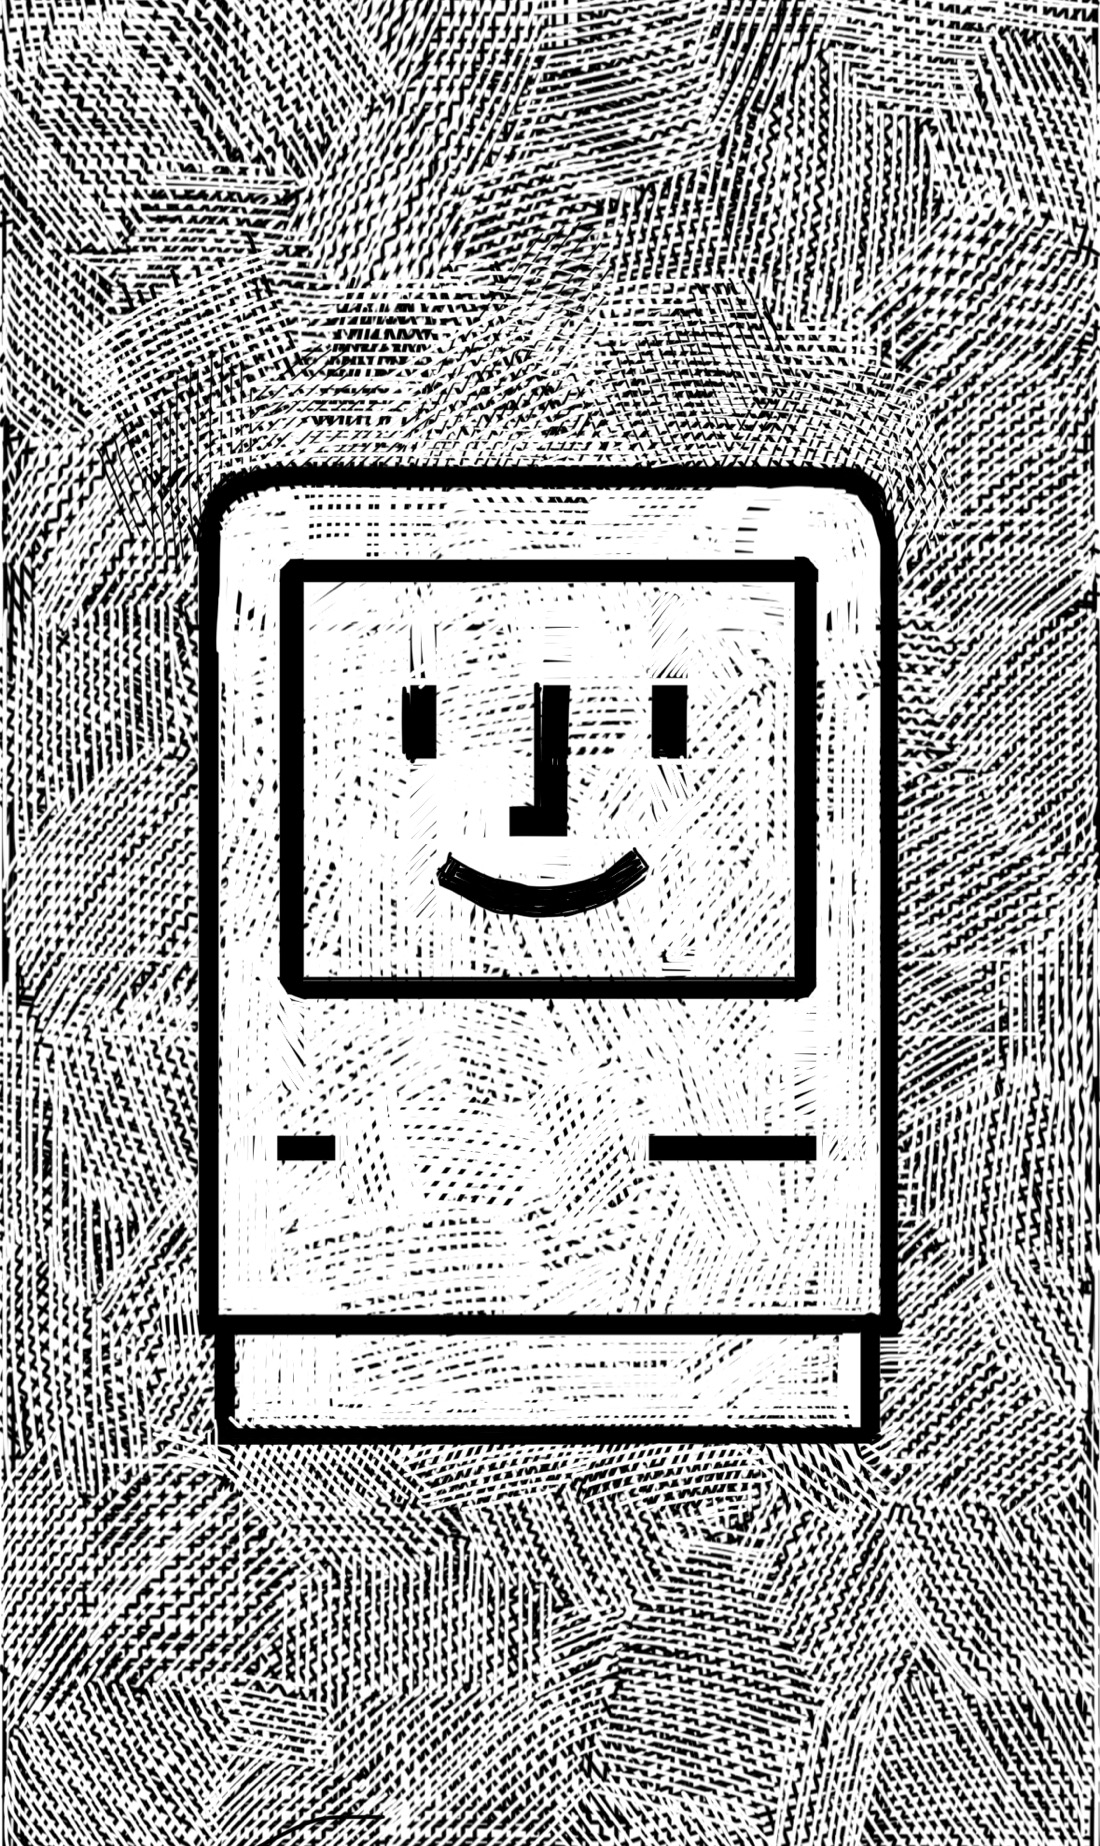 A black and white sketch of the immortal Happy Mac icon: a simple line drawing of a 1980s-era all-in-one Mac, with a happy face displayed on its screen.